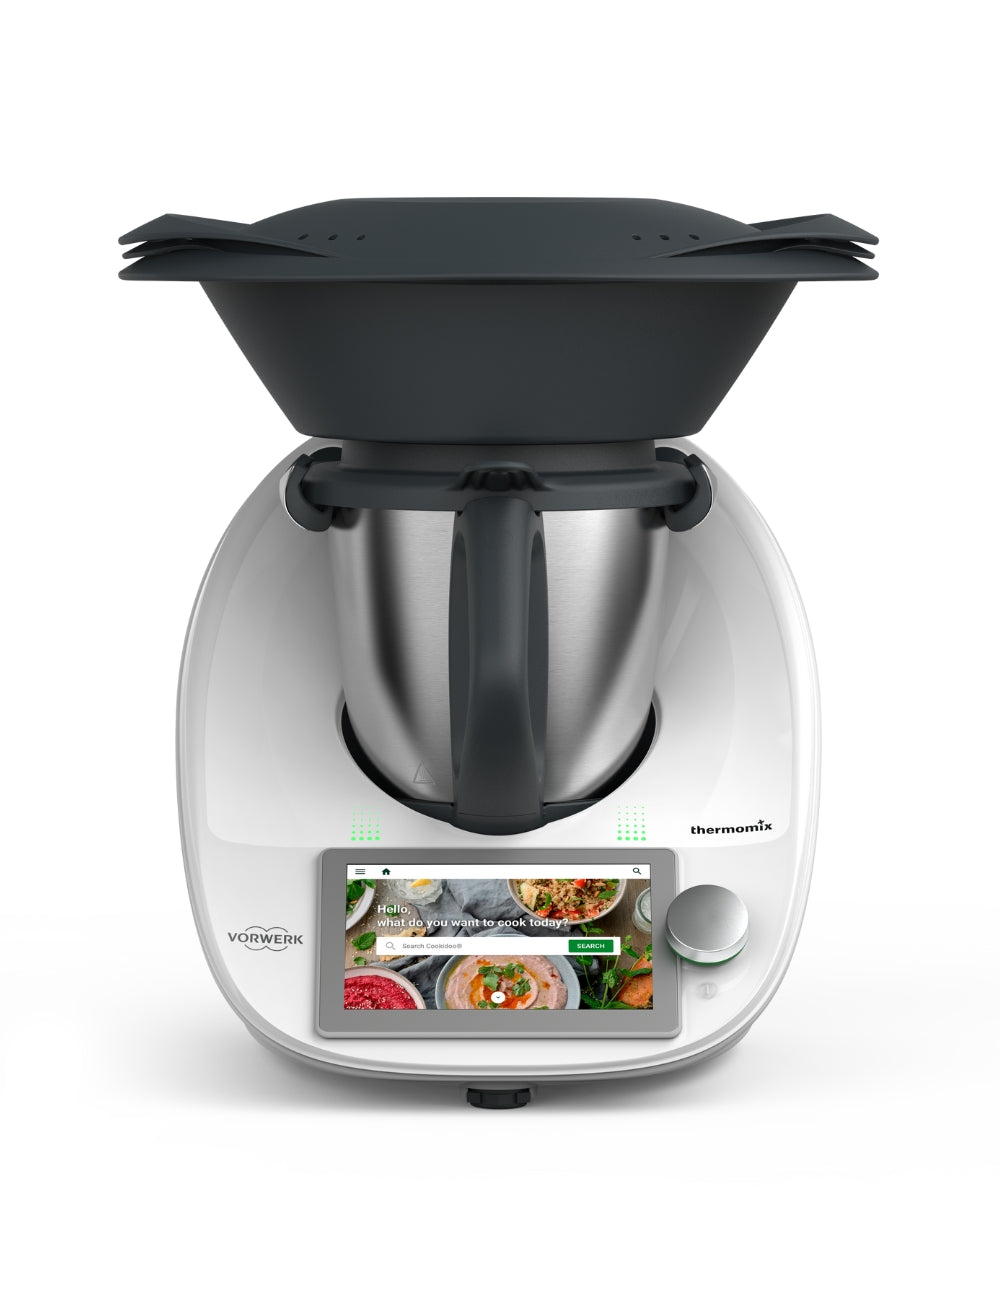 What is Thermomix? - My Thermomix Adventures